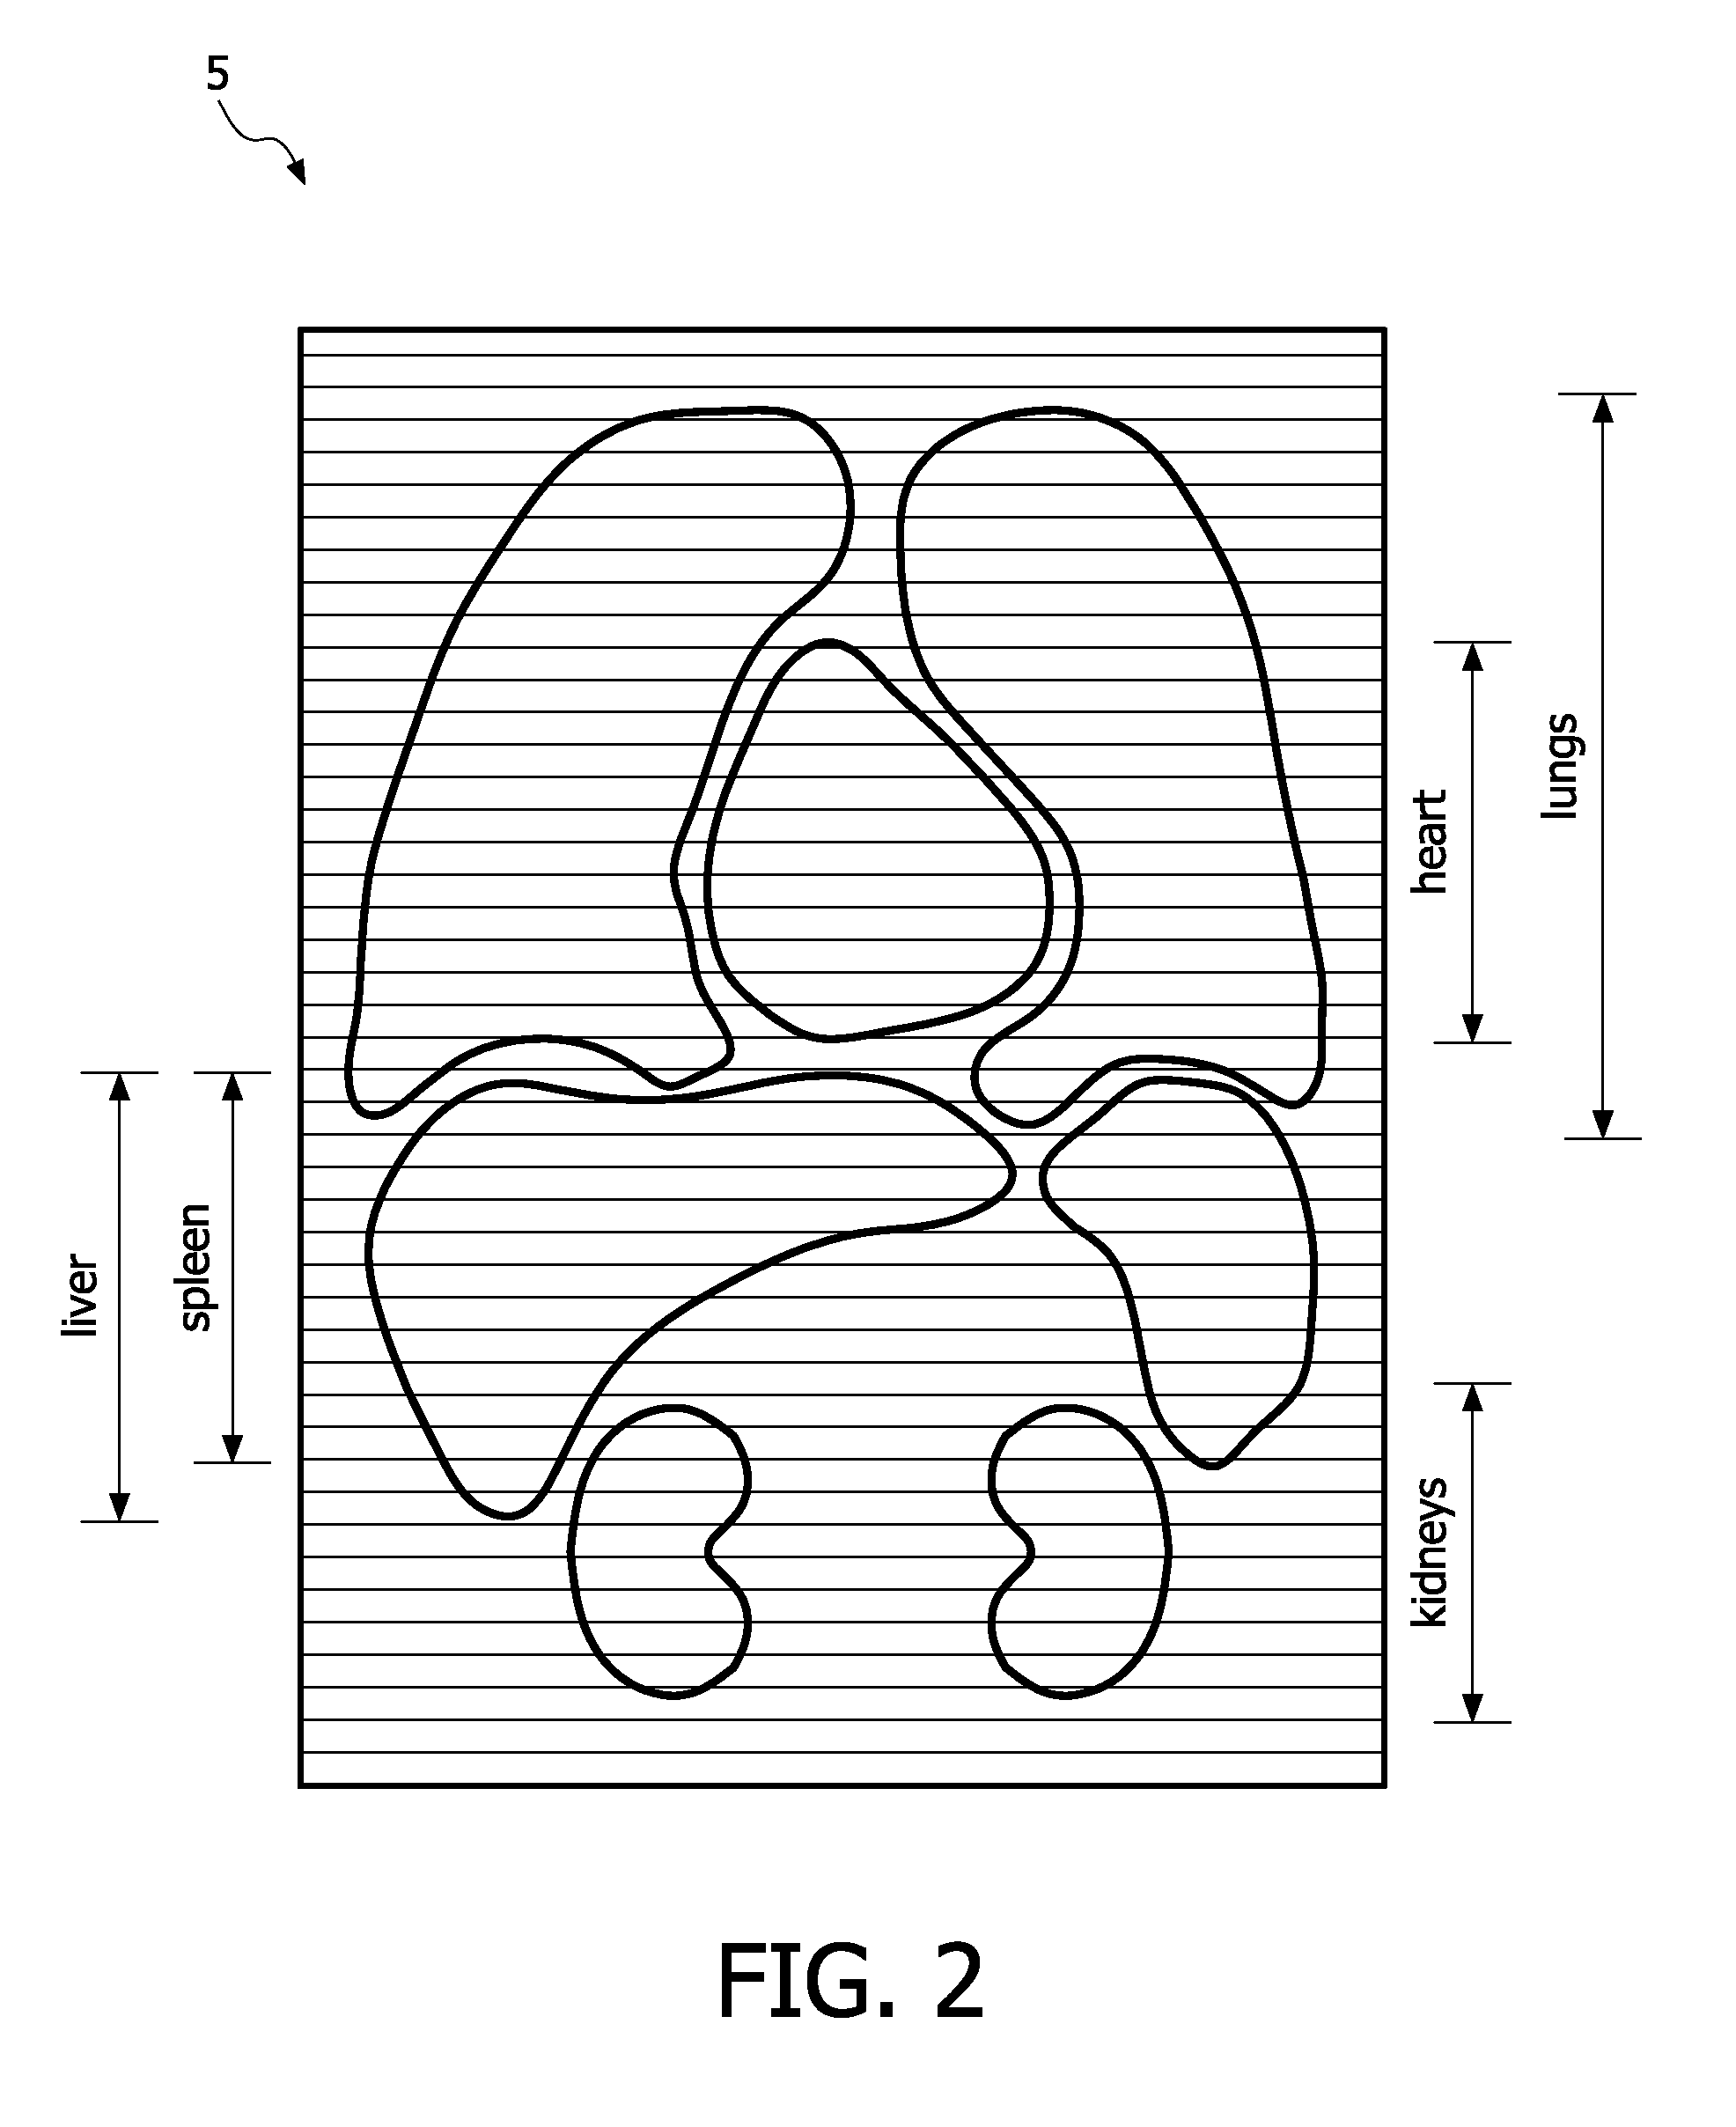 Method of retrieving data from a medical image data set